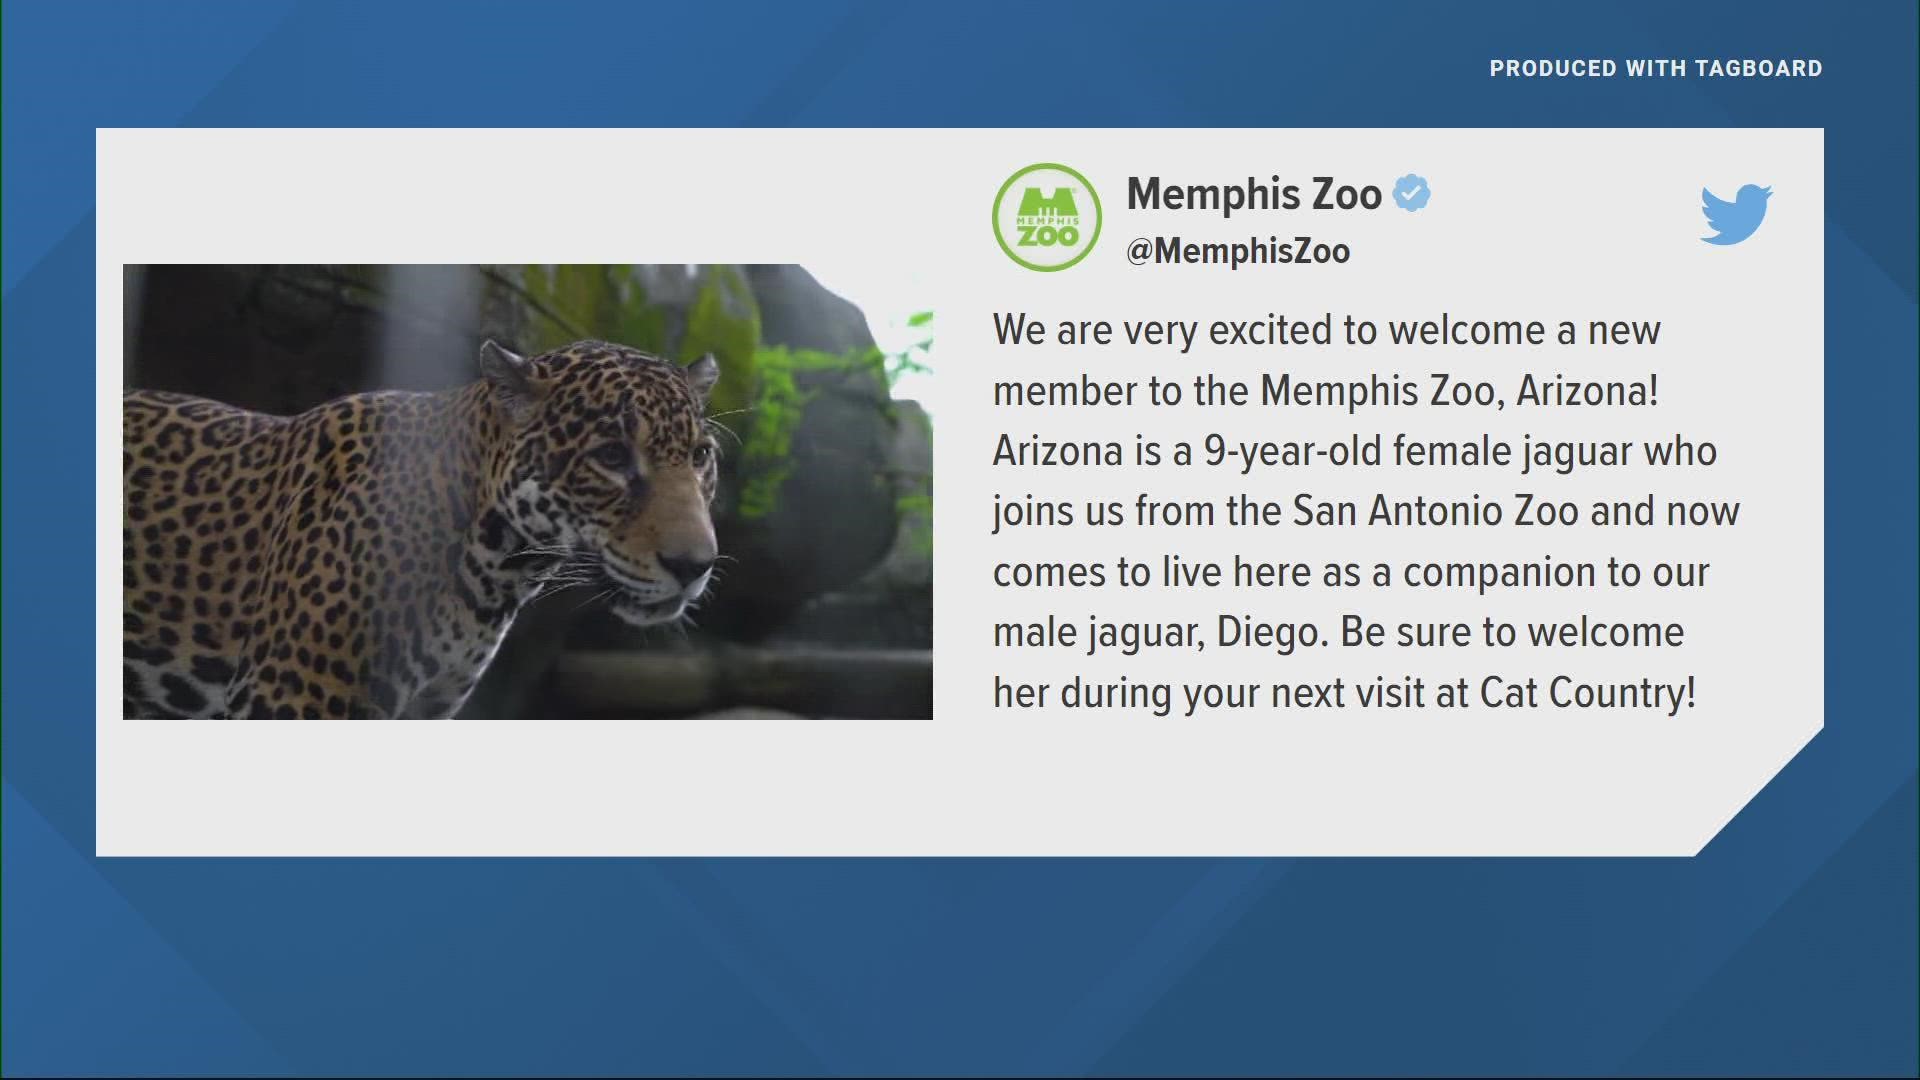 Arizona is a 9-year-old female jaguar and joins male jaguar Diego in Memphis.